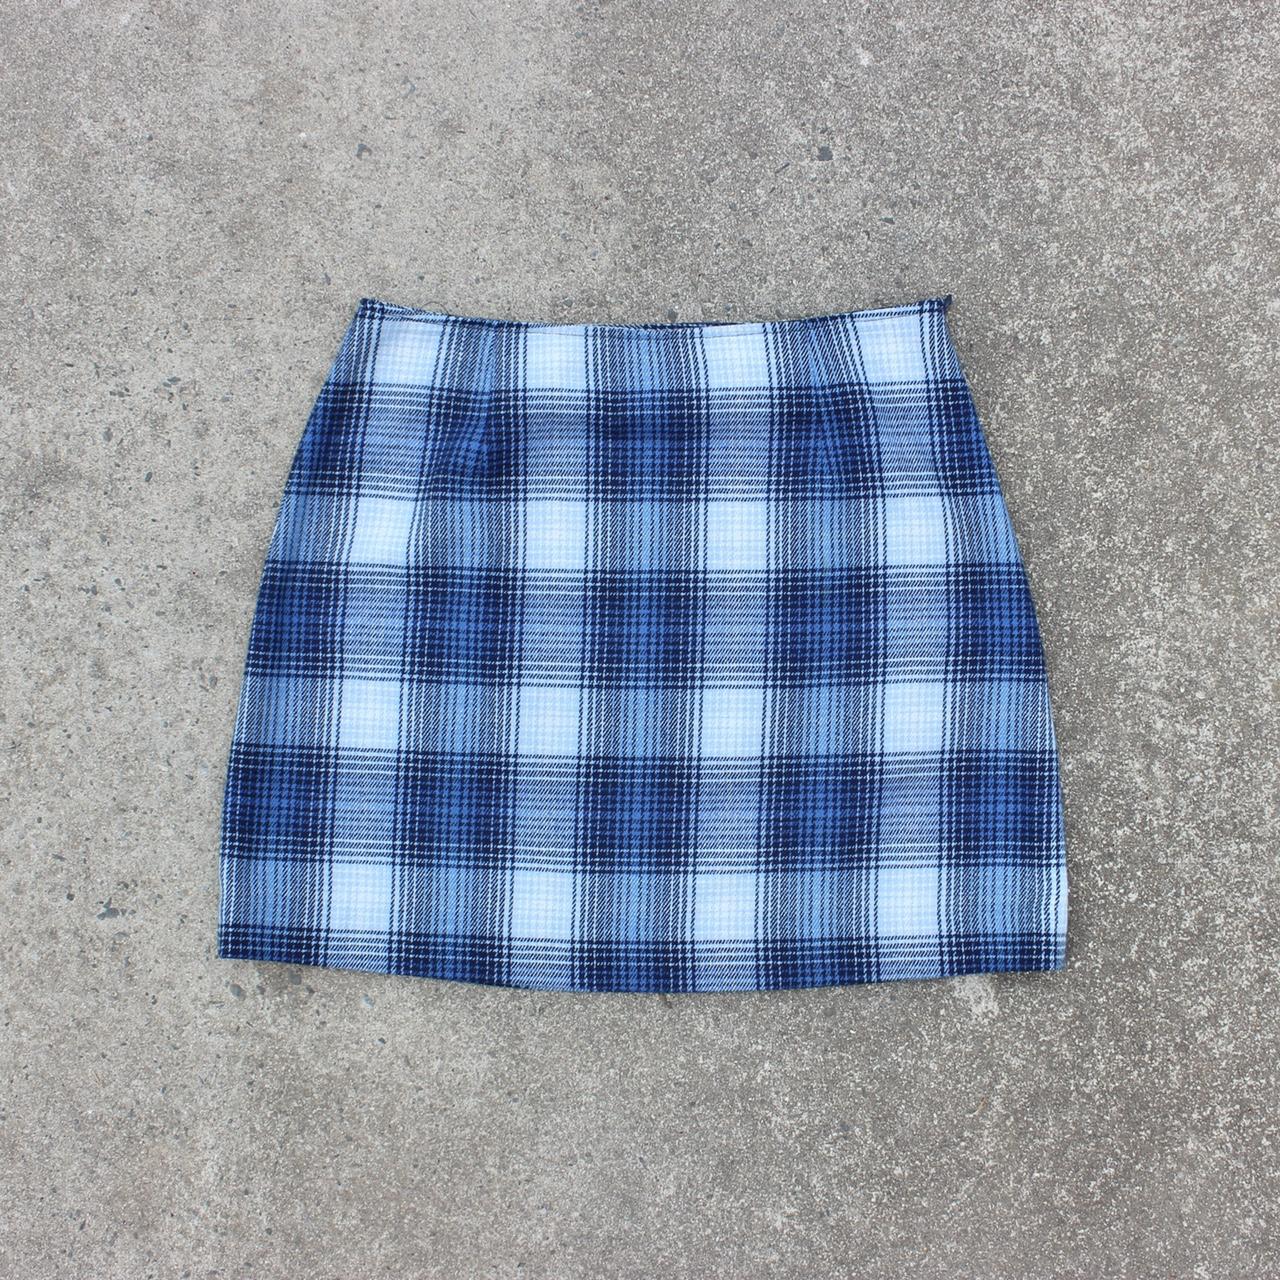 THE LIMITED Women's Blue and White Skirt